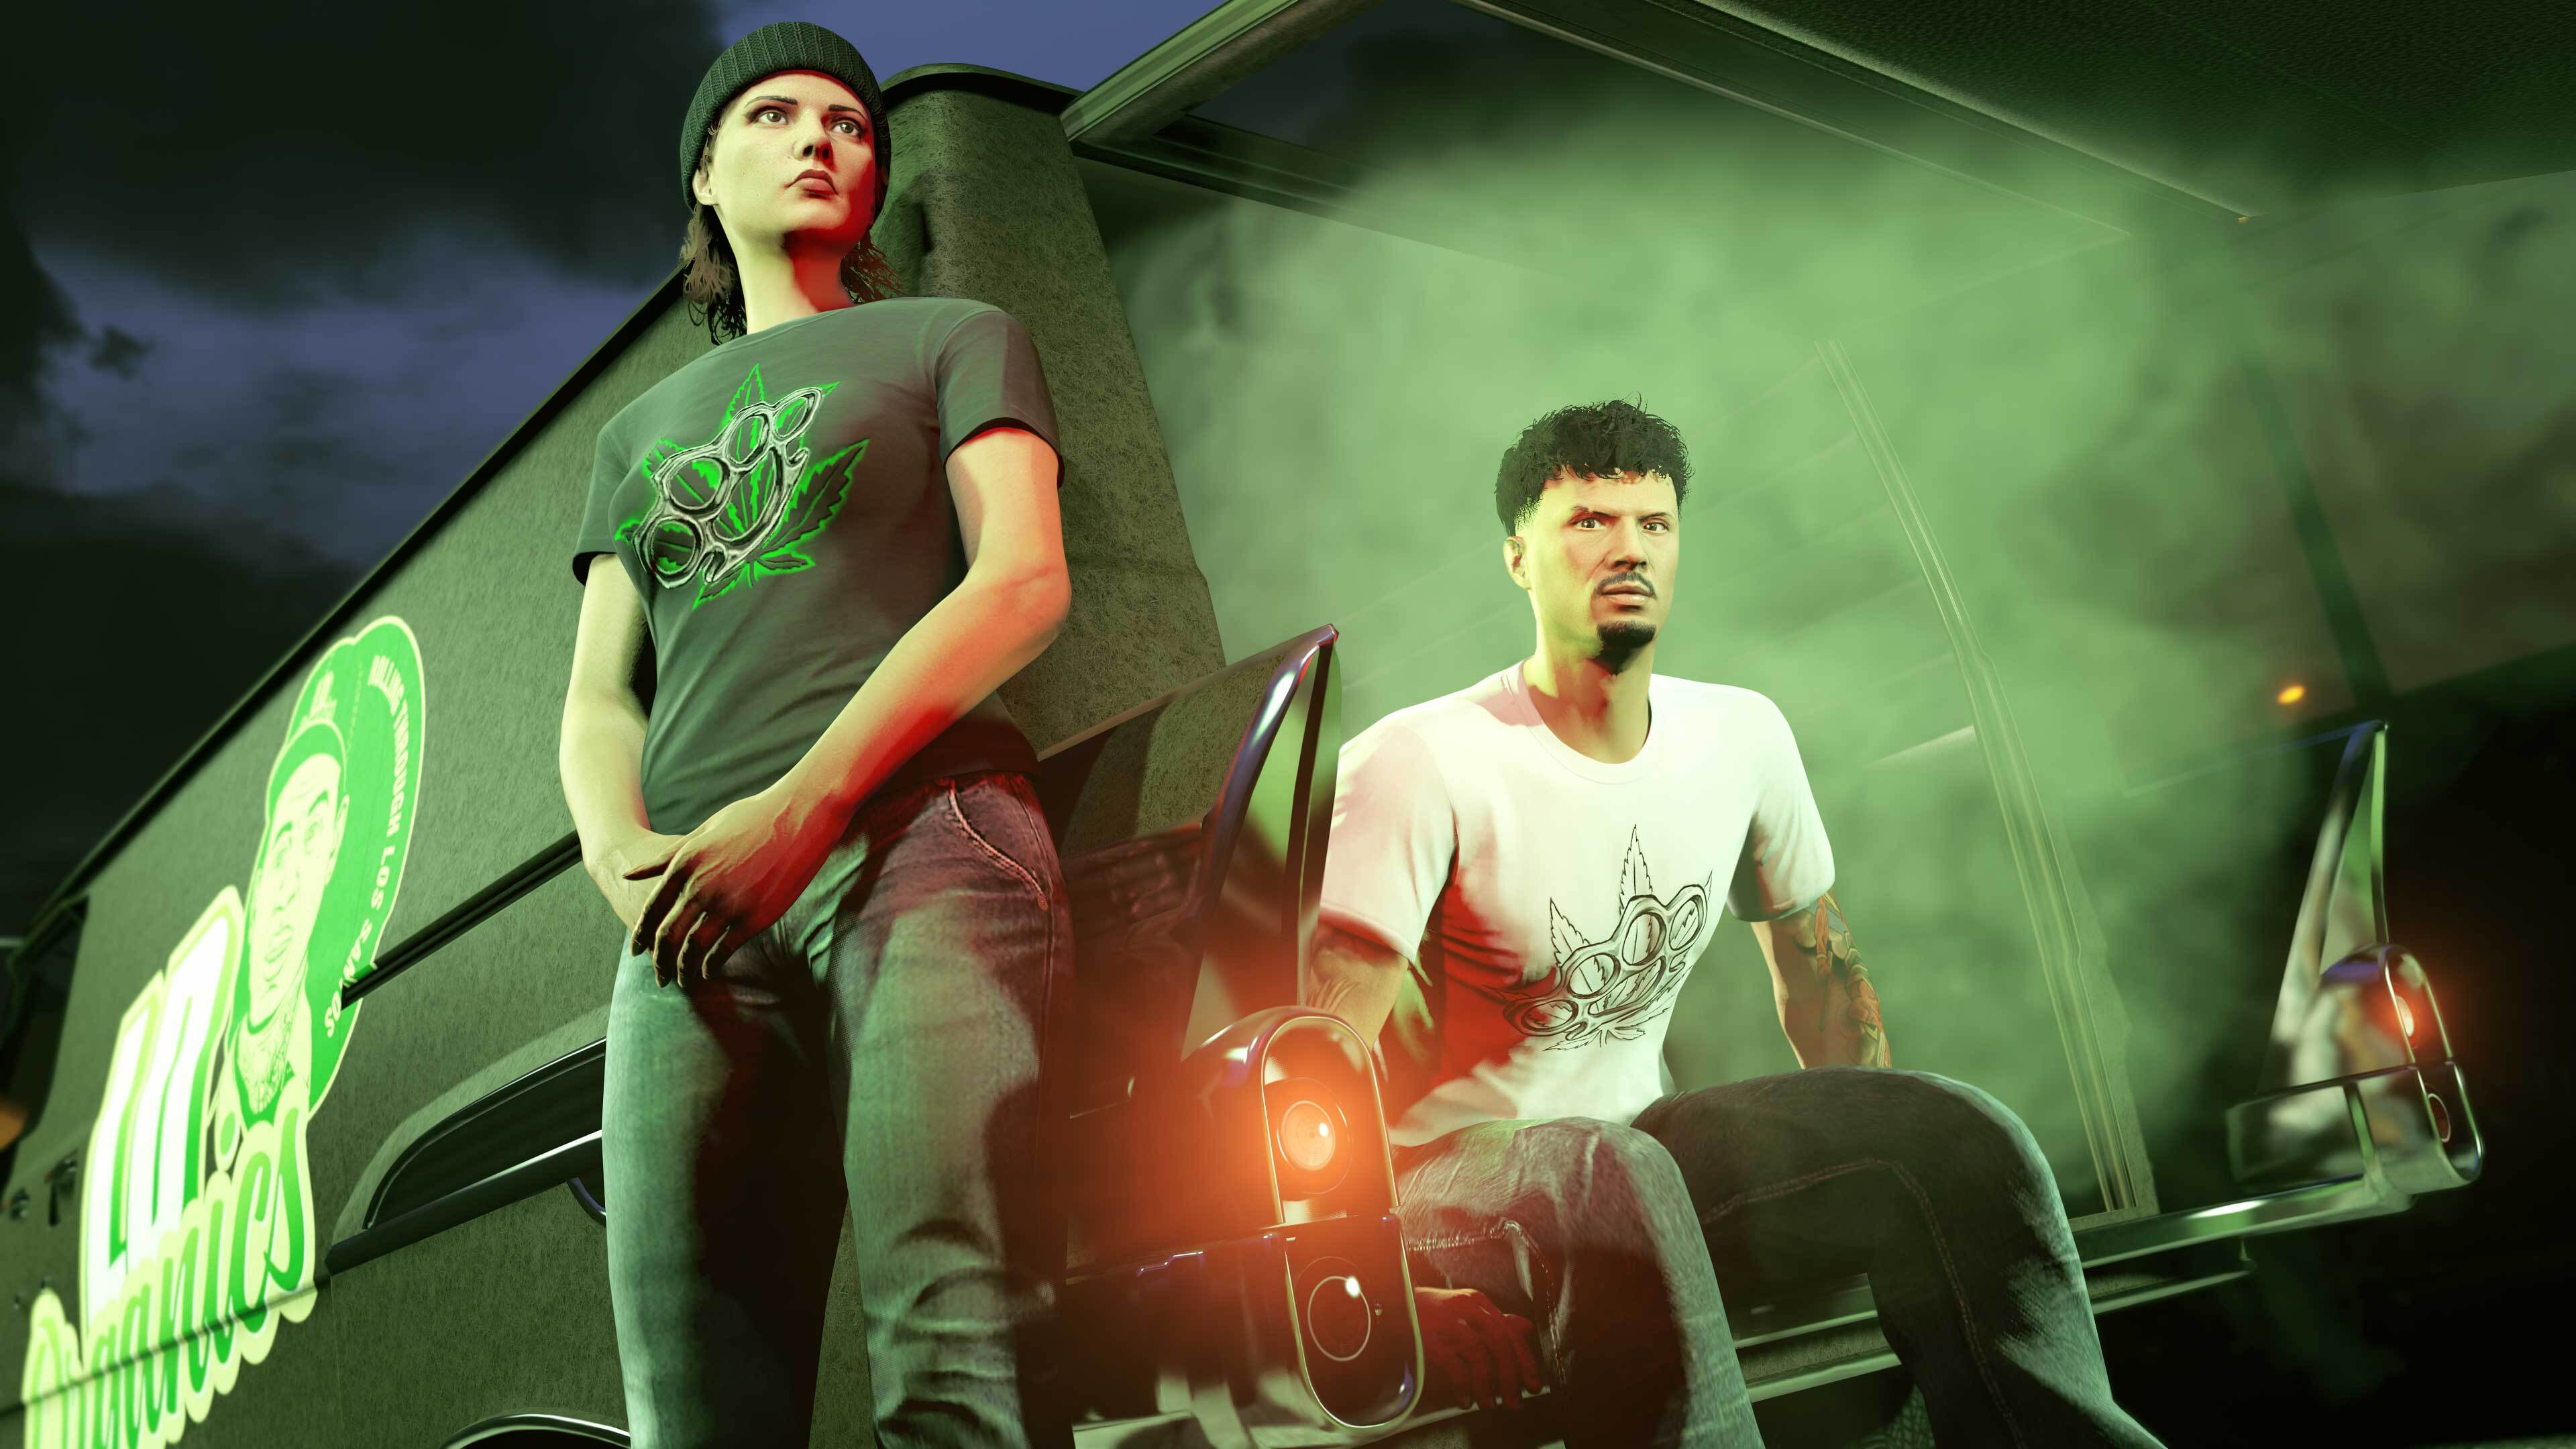 GTA Online Celebrates 4/20 With Double XP, Money, And More